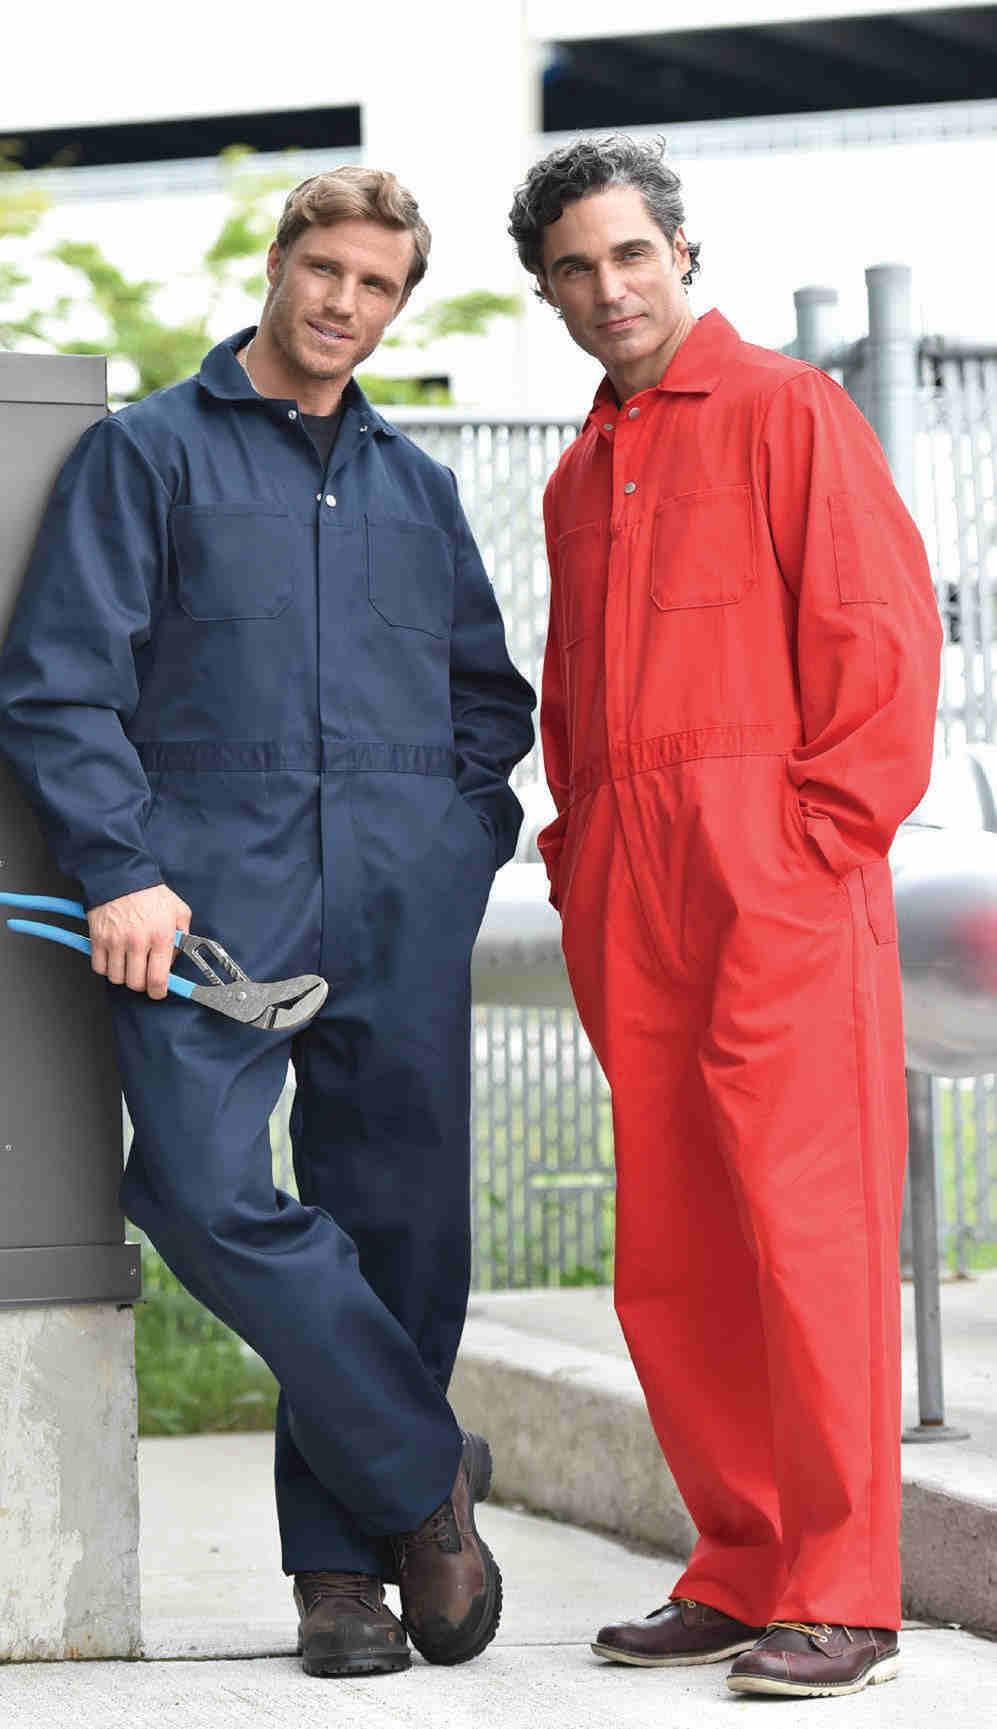 COVERALLS Poly/Cotton Action Back Coveralls Designed to maximize comfort without sacrificing durability and performance, these coveralls offer lasting wear and ease of accessibility